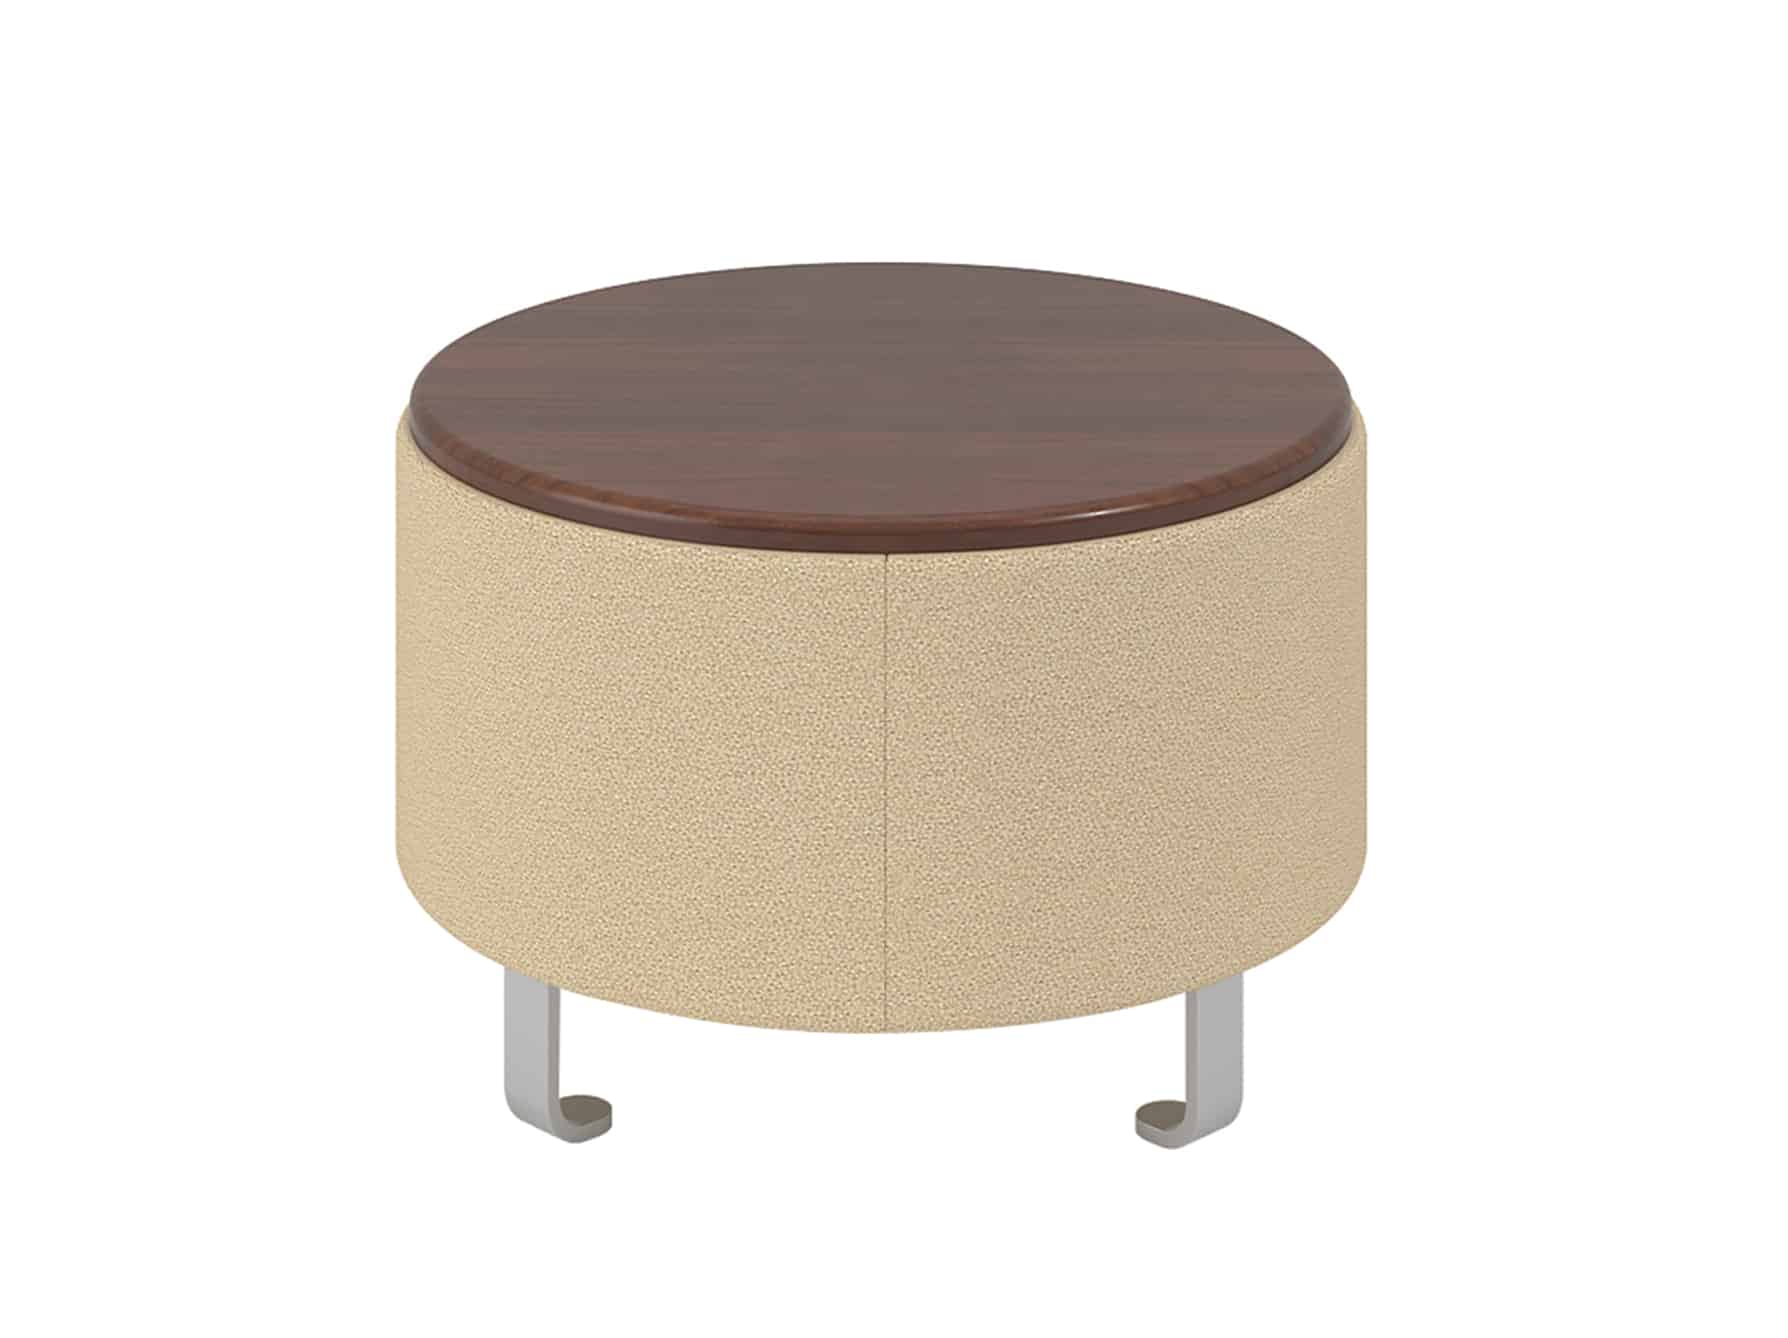 22" Round Ottoman, with Low Table Top, Sled Feet